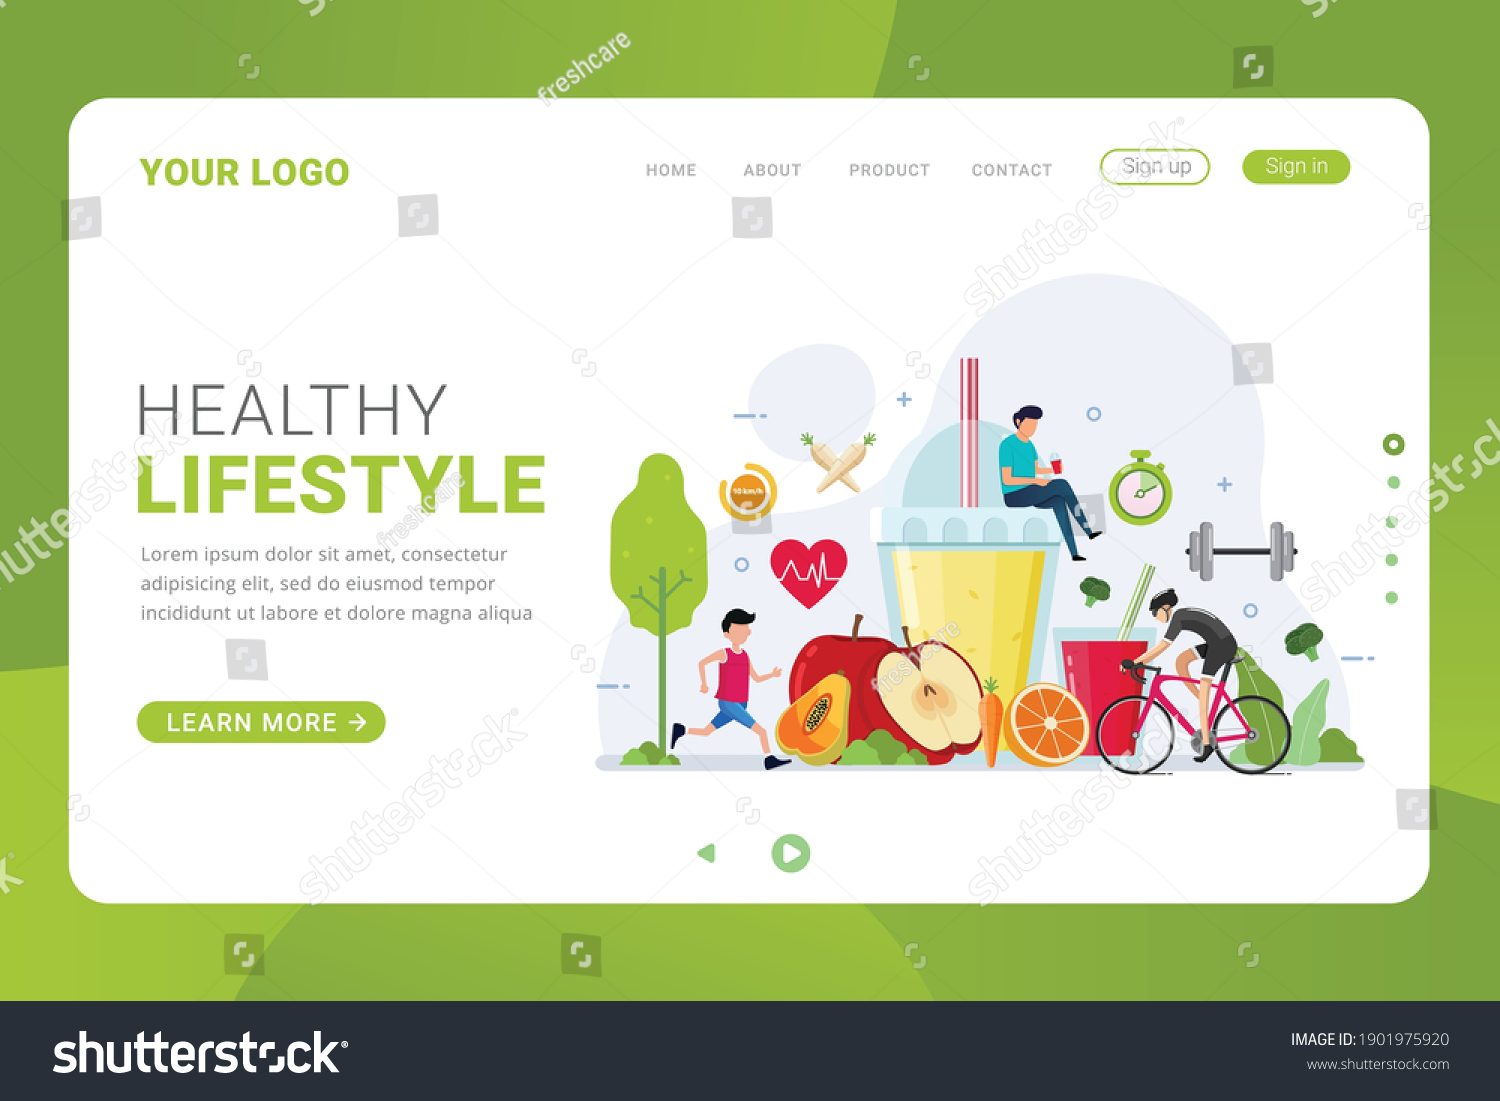 Landing page template healthy lifestyle design concept vector illustration #1901975920